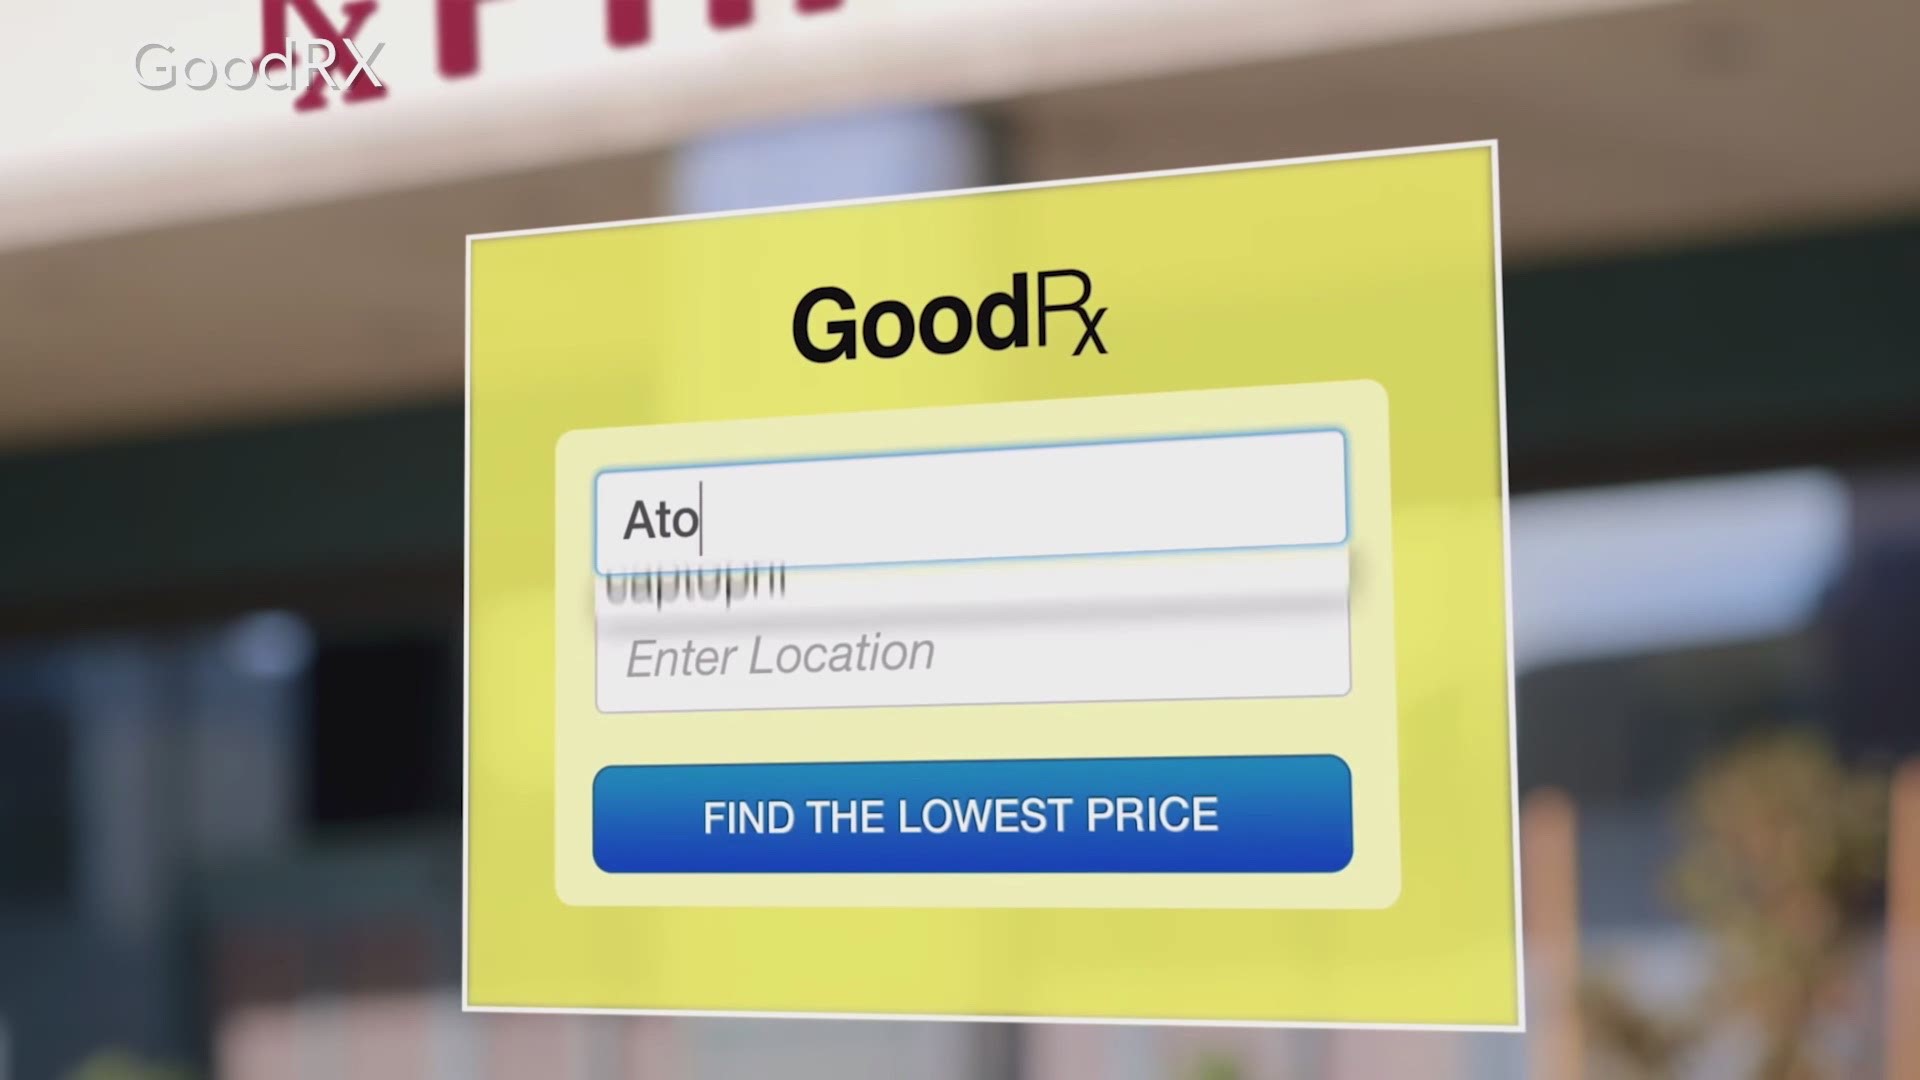 Consumer Reports looked at GoodRx and found the app and the company’s website sending personal information to Facebook and other companies